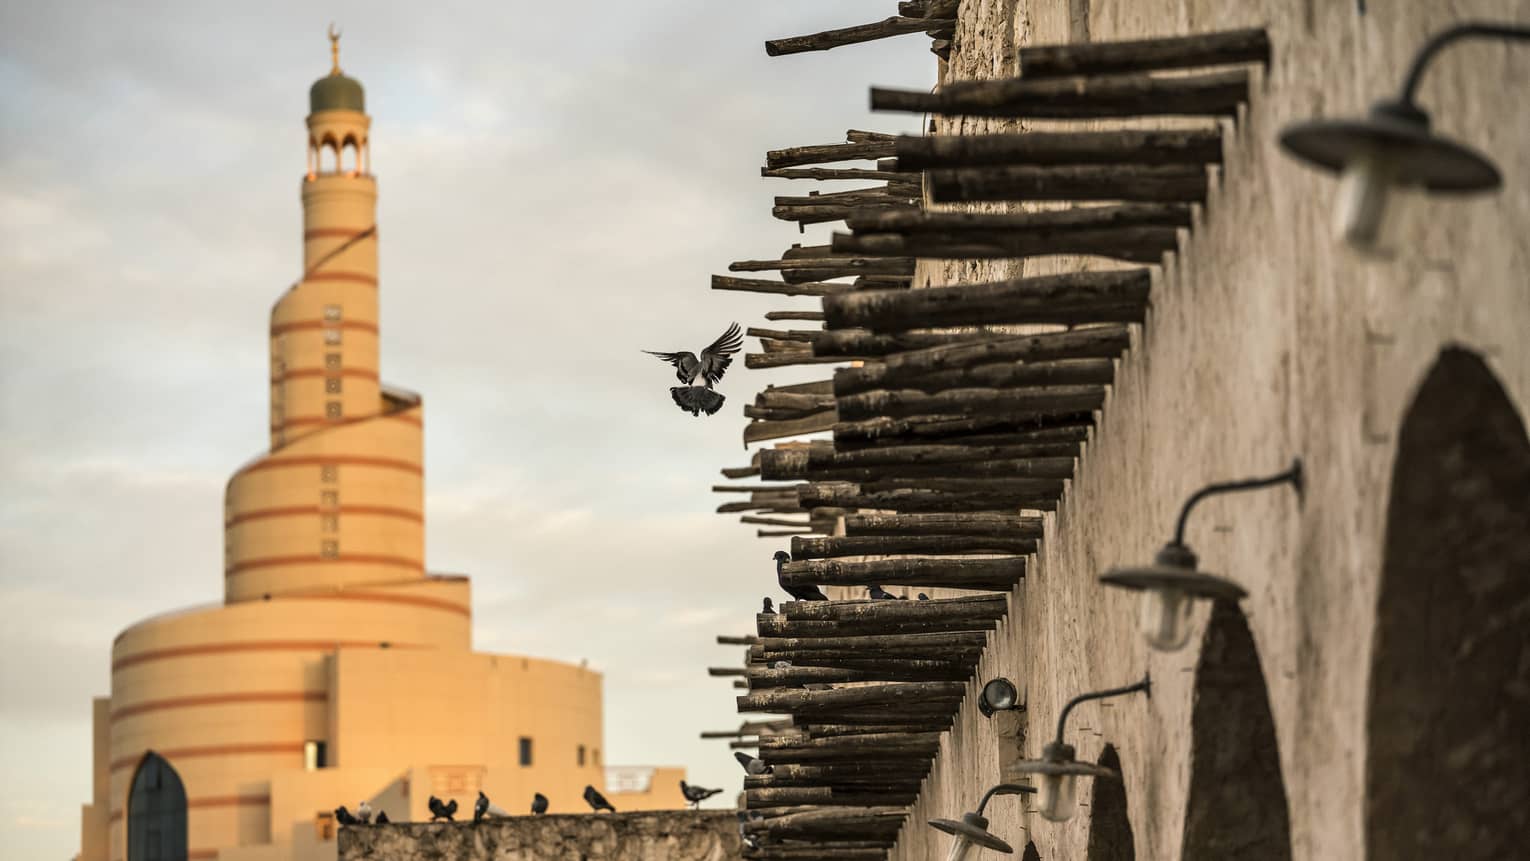 Old stone wall lined with narrow protruding logs, pigeons randomly flying and perched, a spiral minaret towering beyond.